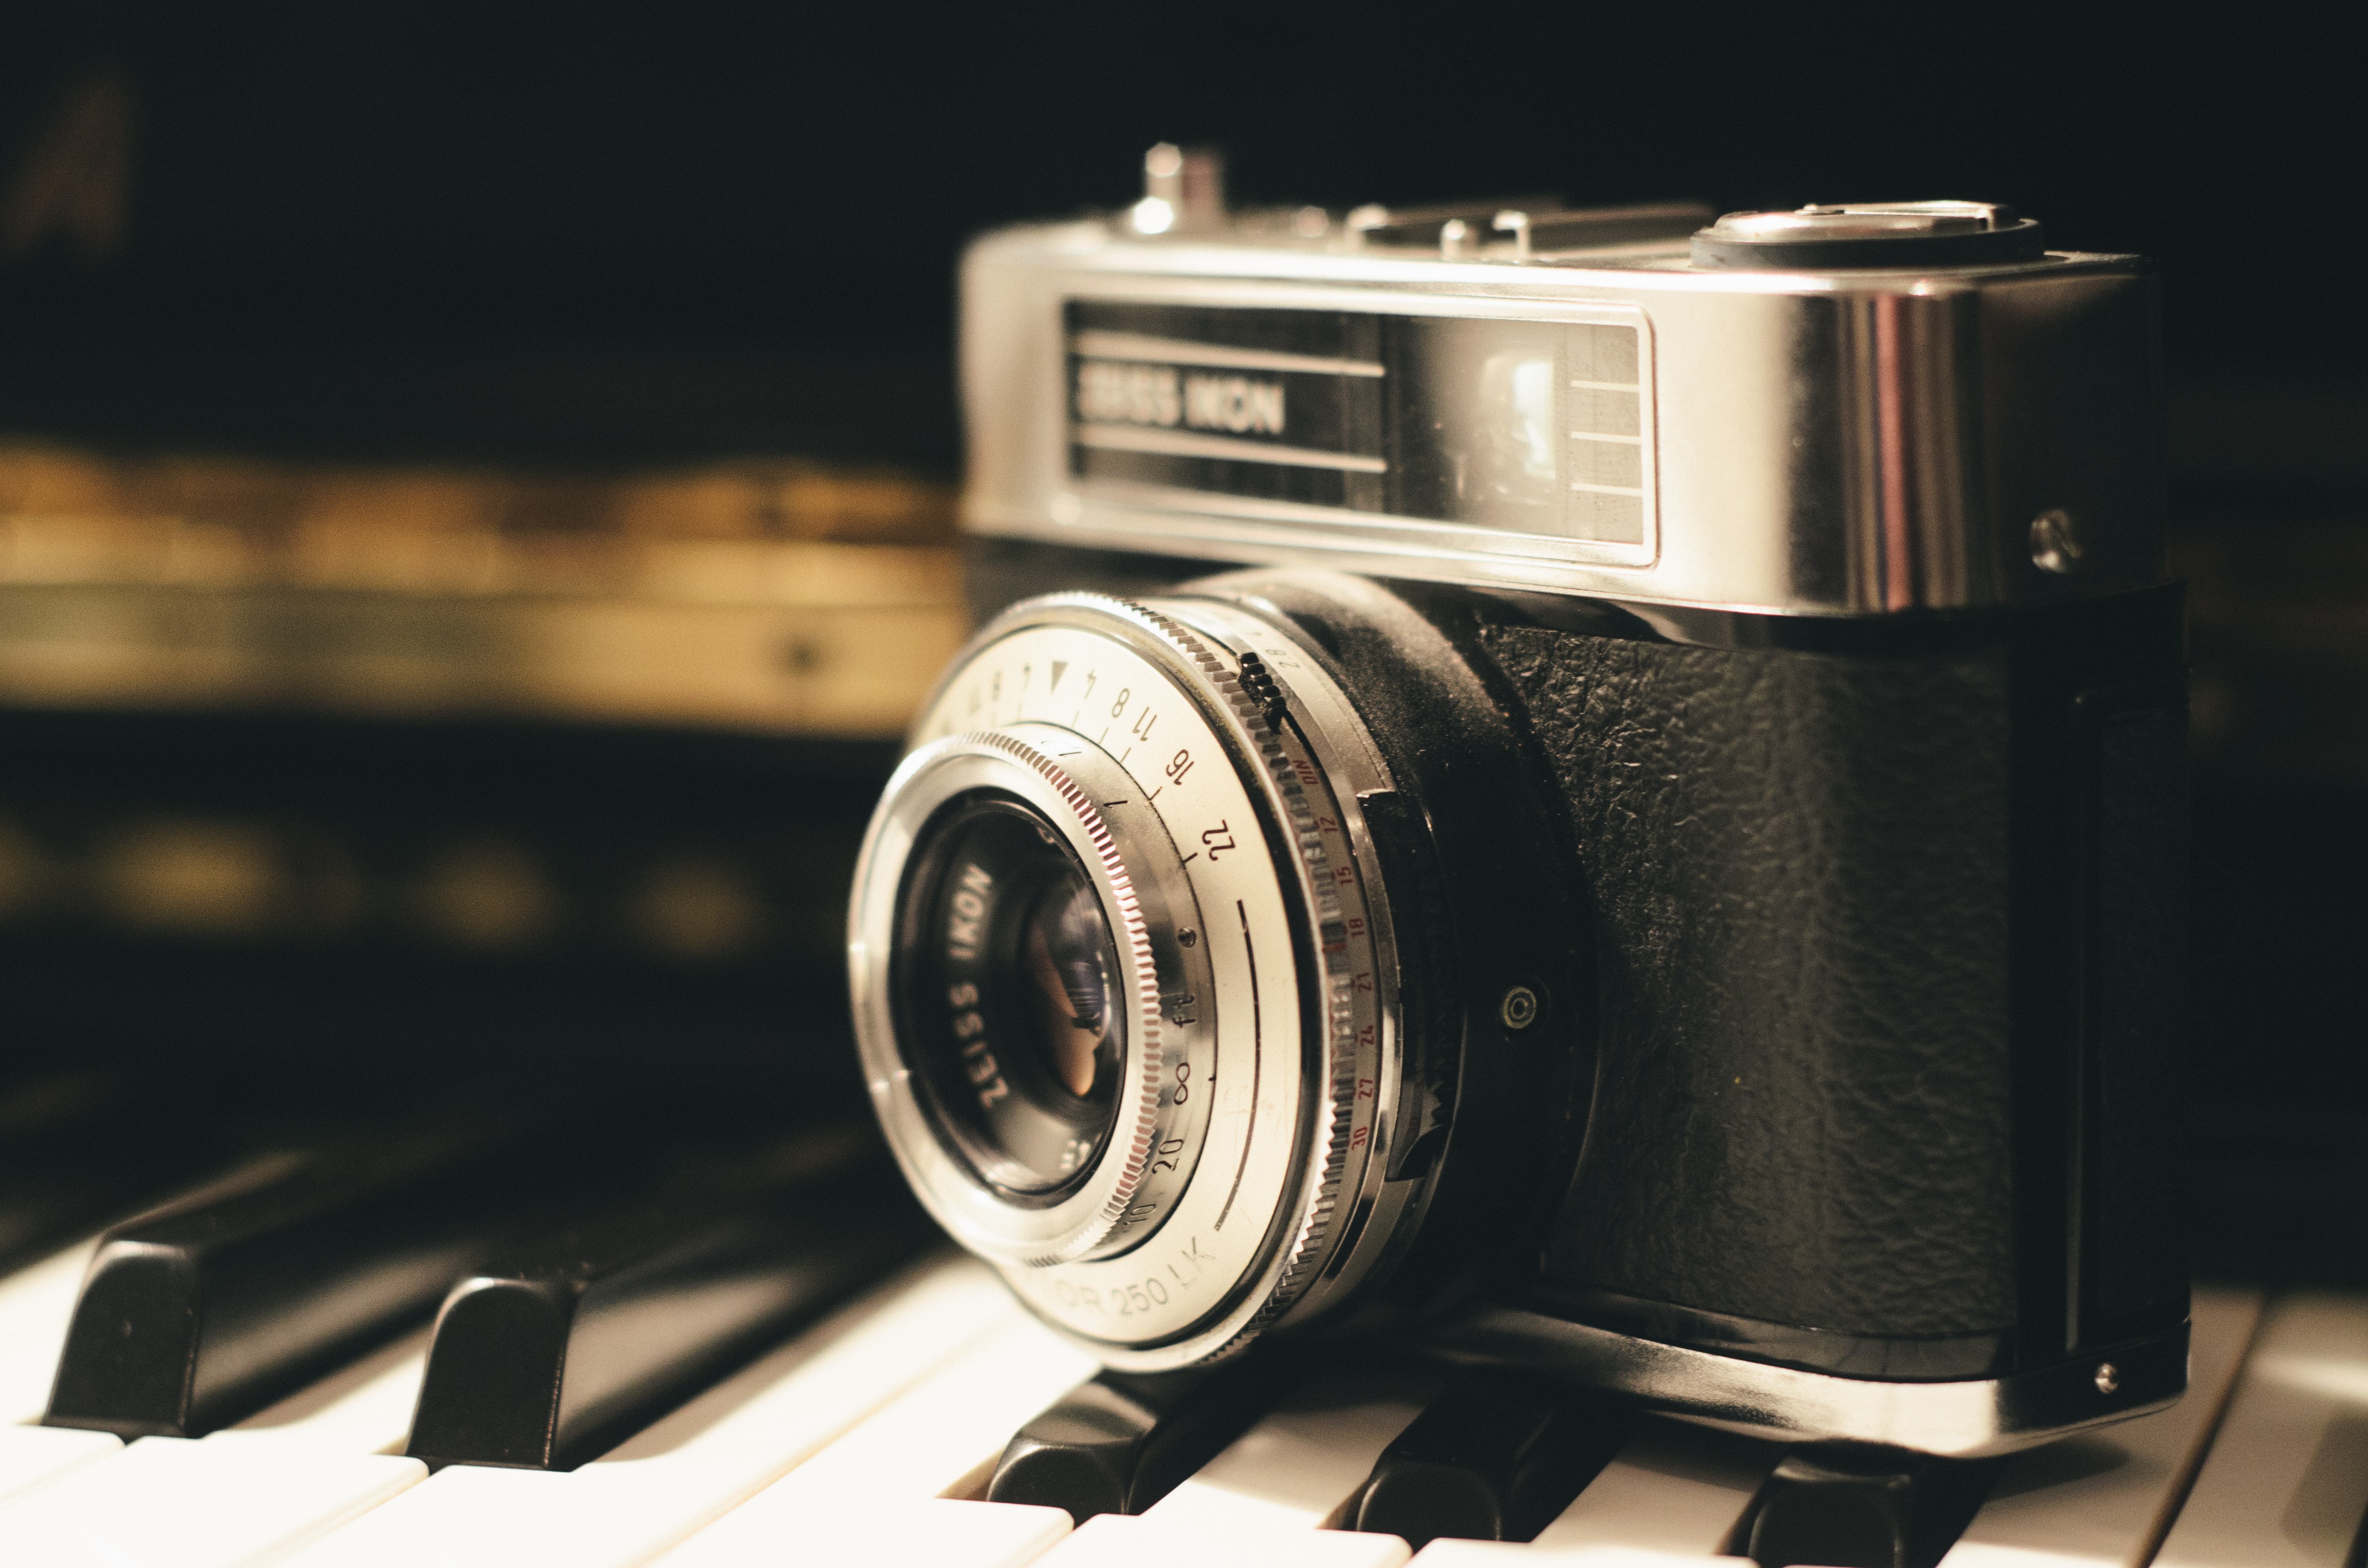 General 4928x3264 camera photography old Nikon technology vintage piano musical instrument